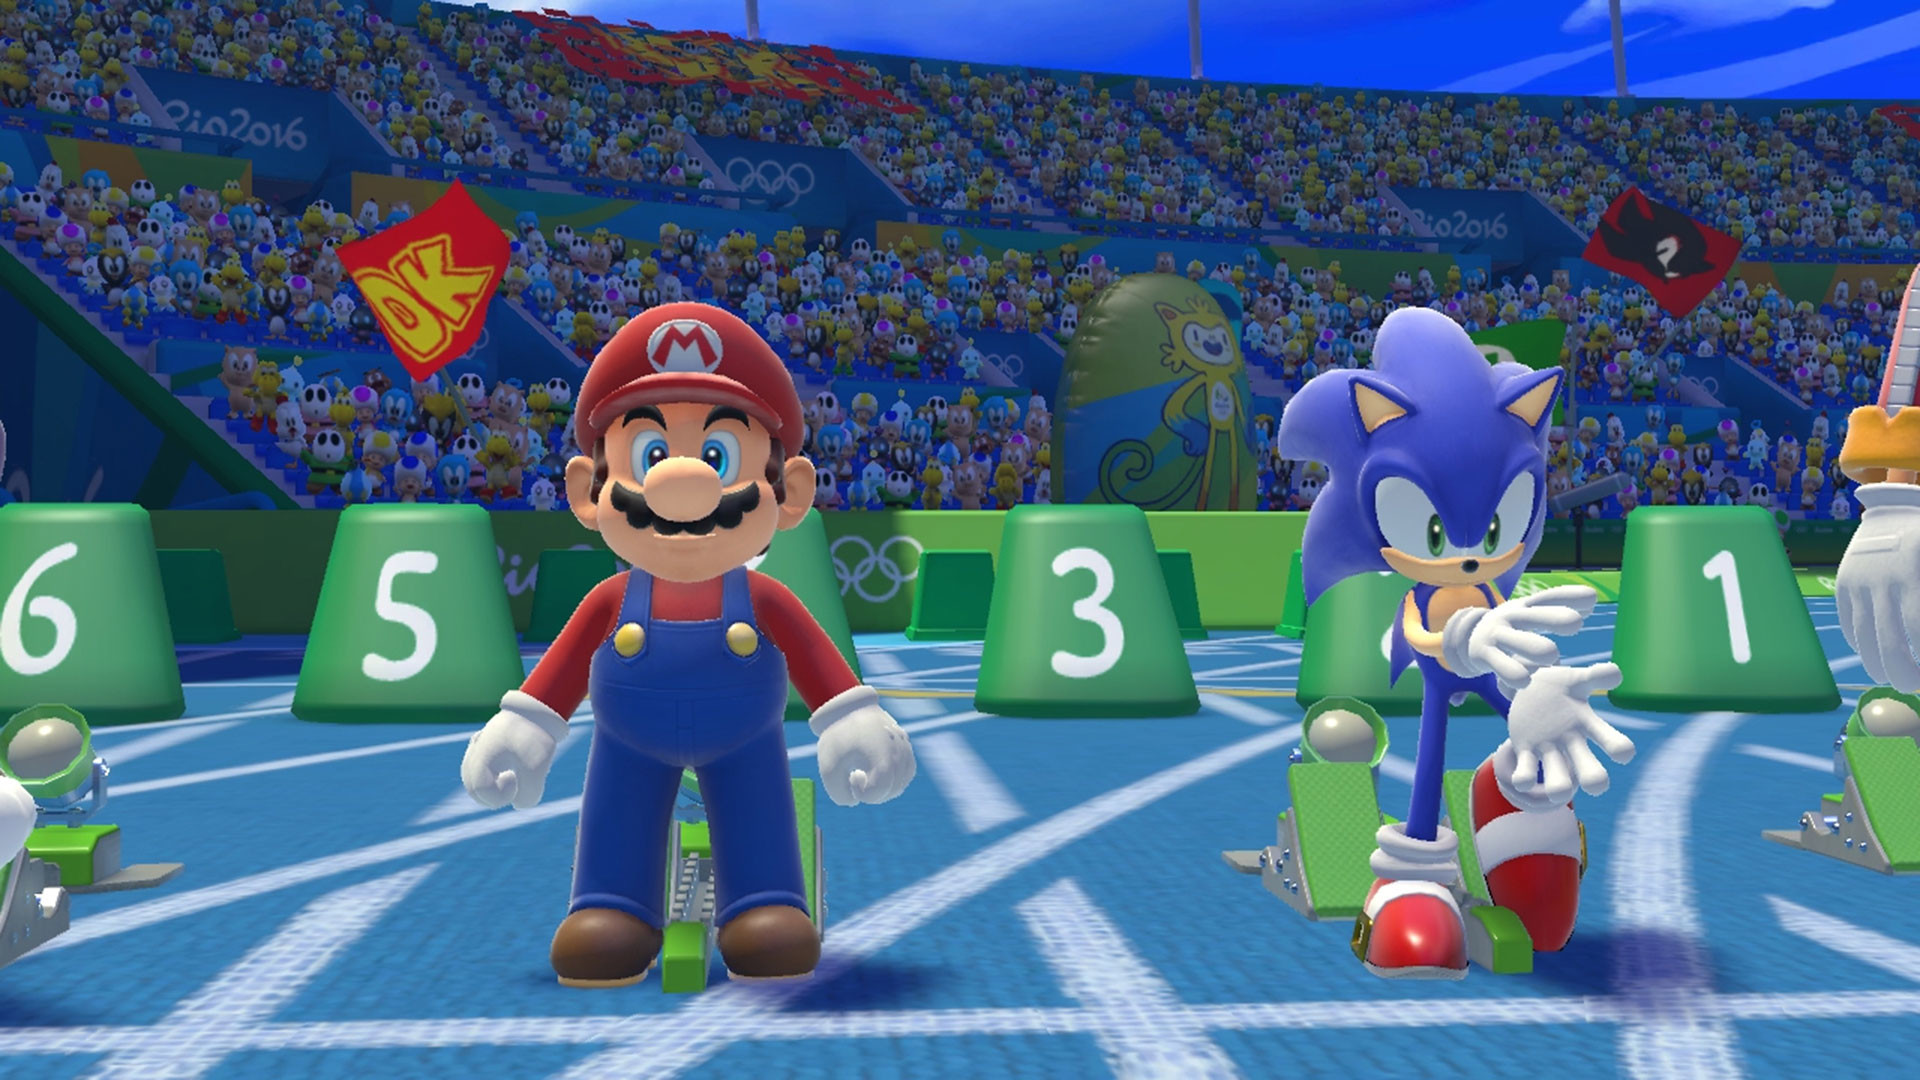 1920x1080 Mario and Sonic at the Rio 2016 Olymic Games 4K Wallpaper ...